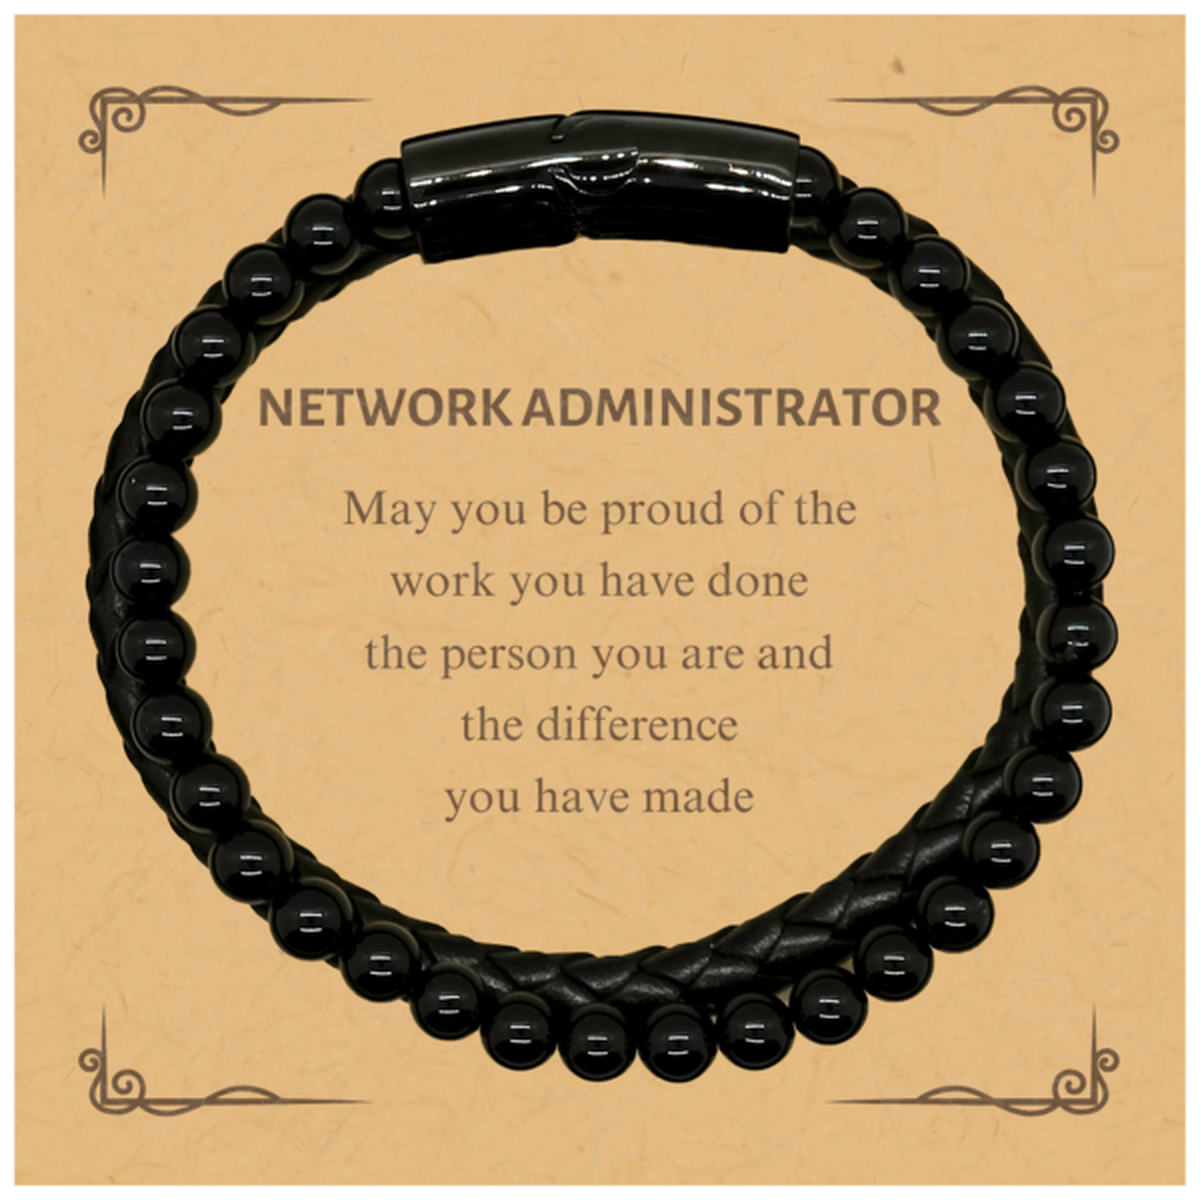 Network Administrator May you be proud of the work you have done, Retirement Network Administrator Stone Leather Bracelets for Colleague Appreciation Gifts Amazing for Network Administrator